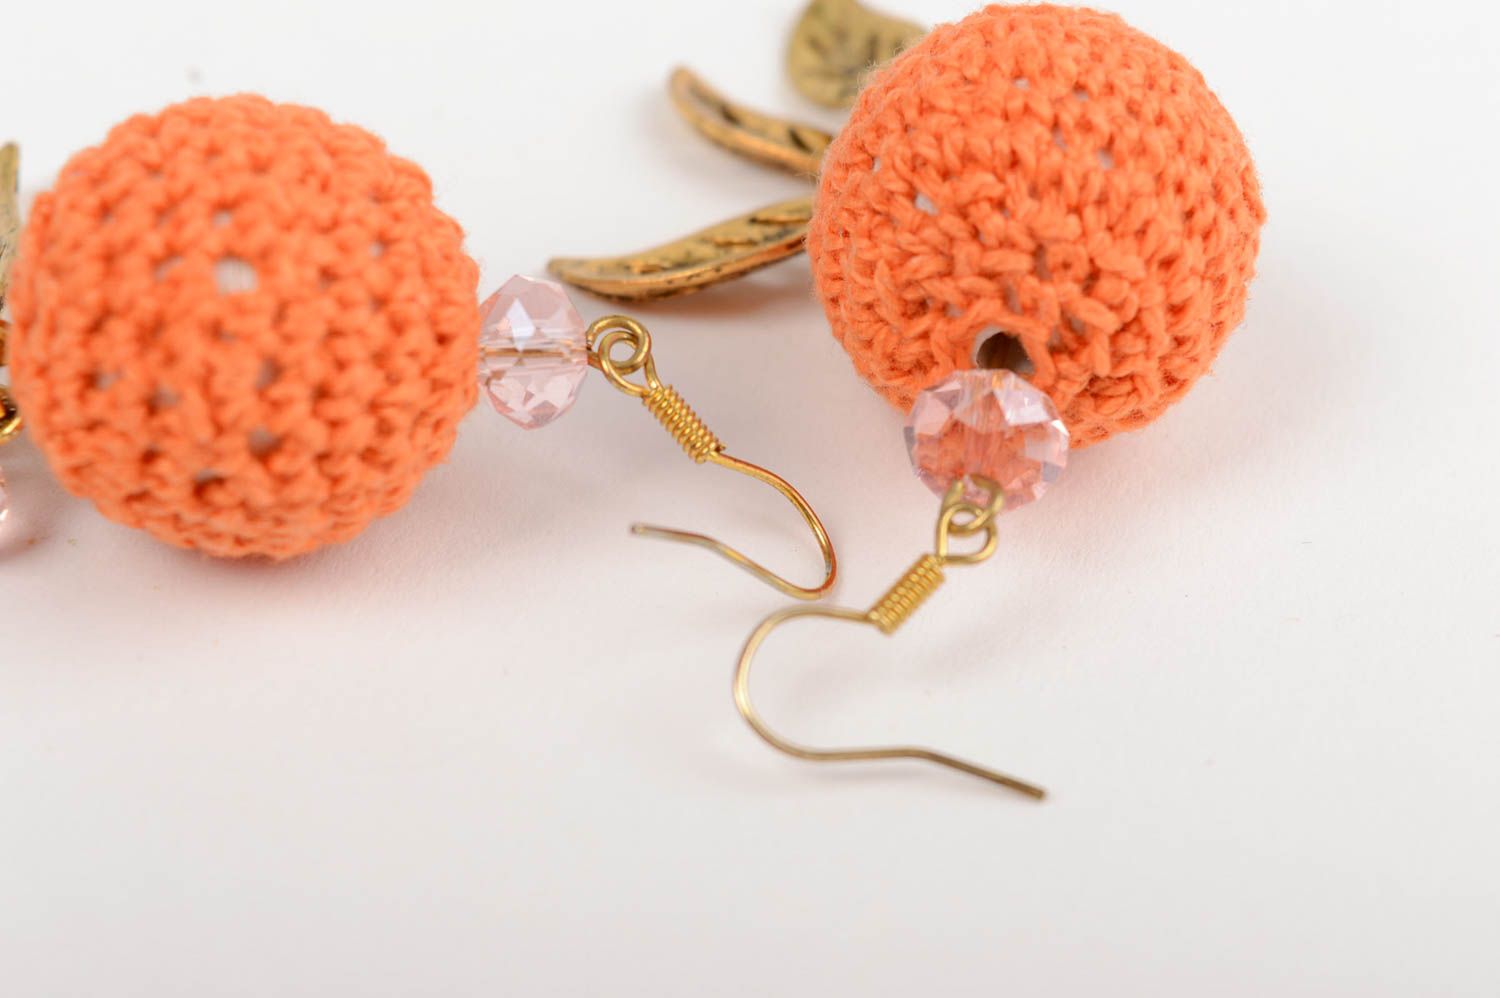 Handmade designer earrings with orange crocheted over beads and crystal glass photo 2